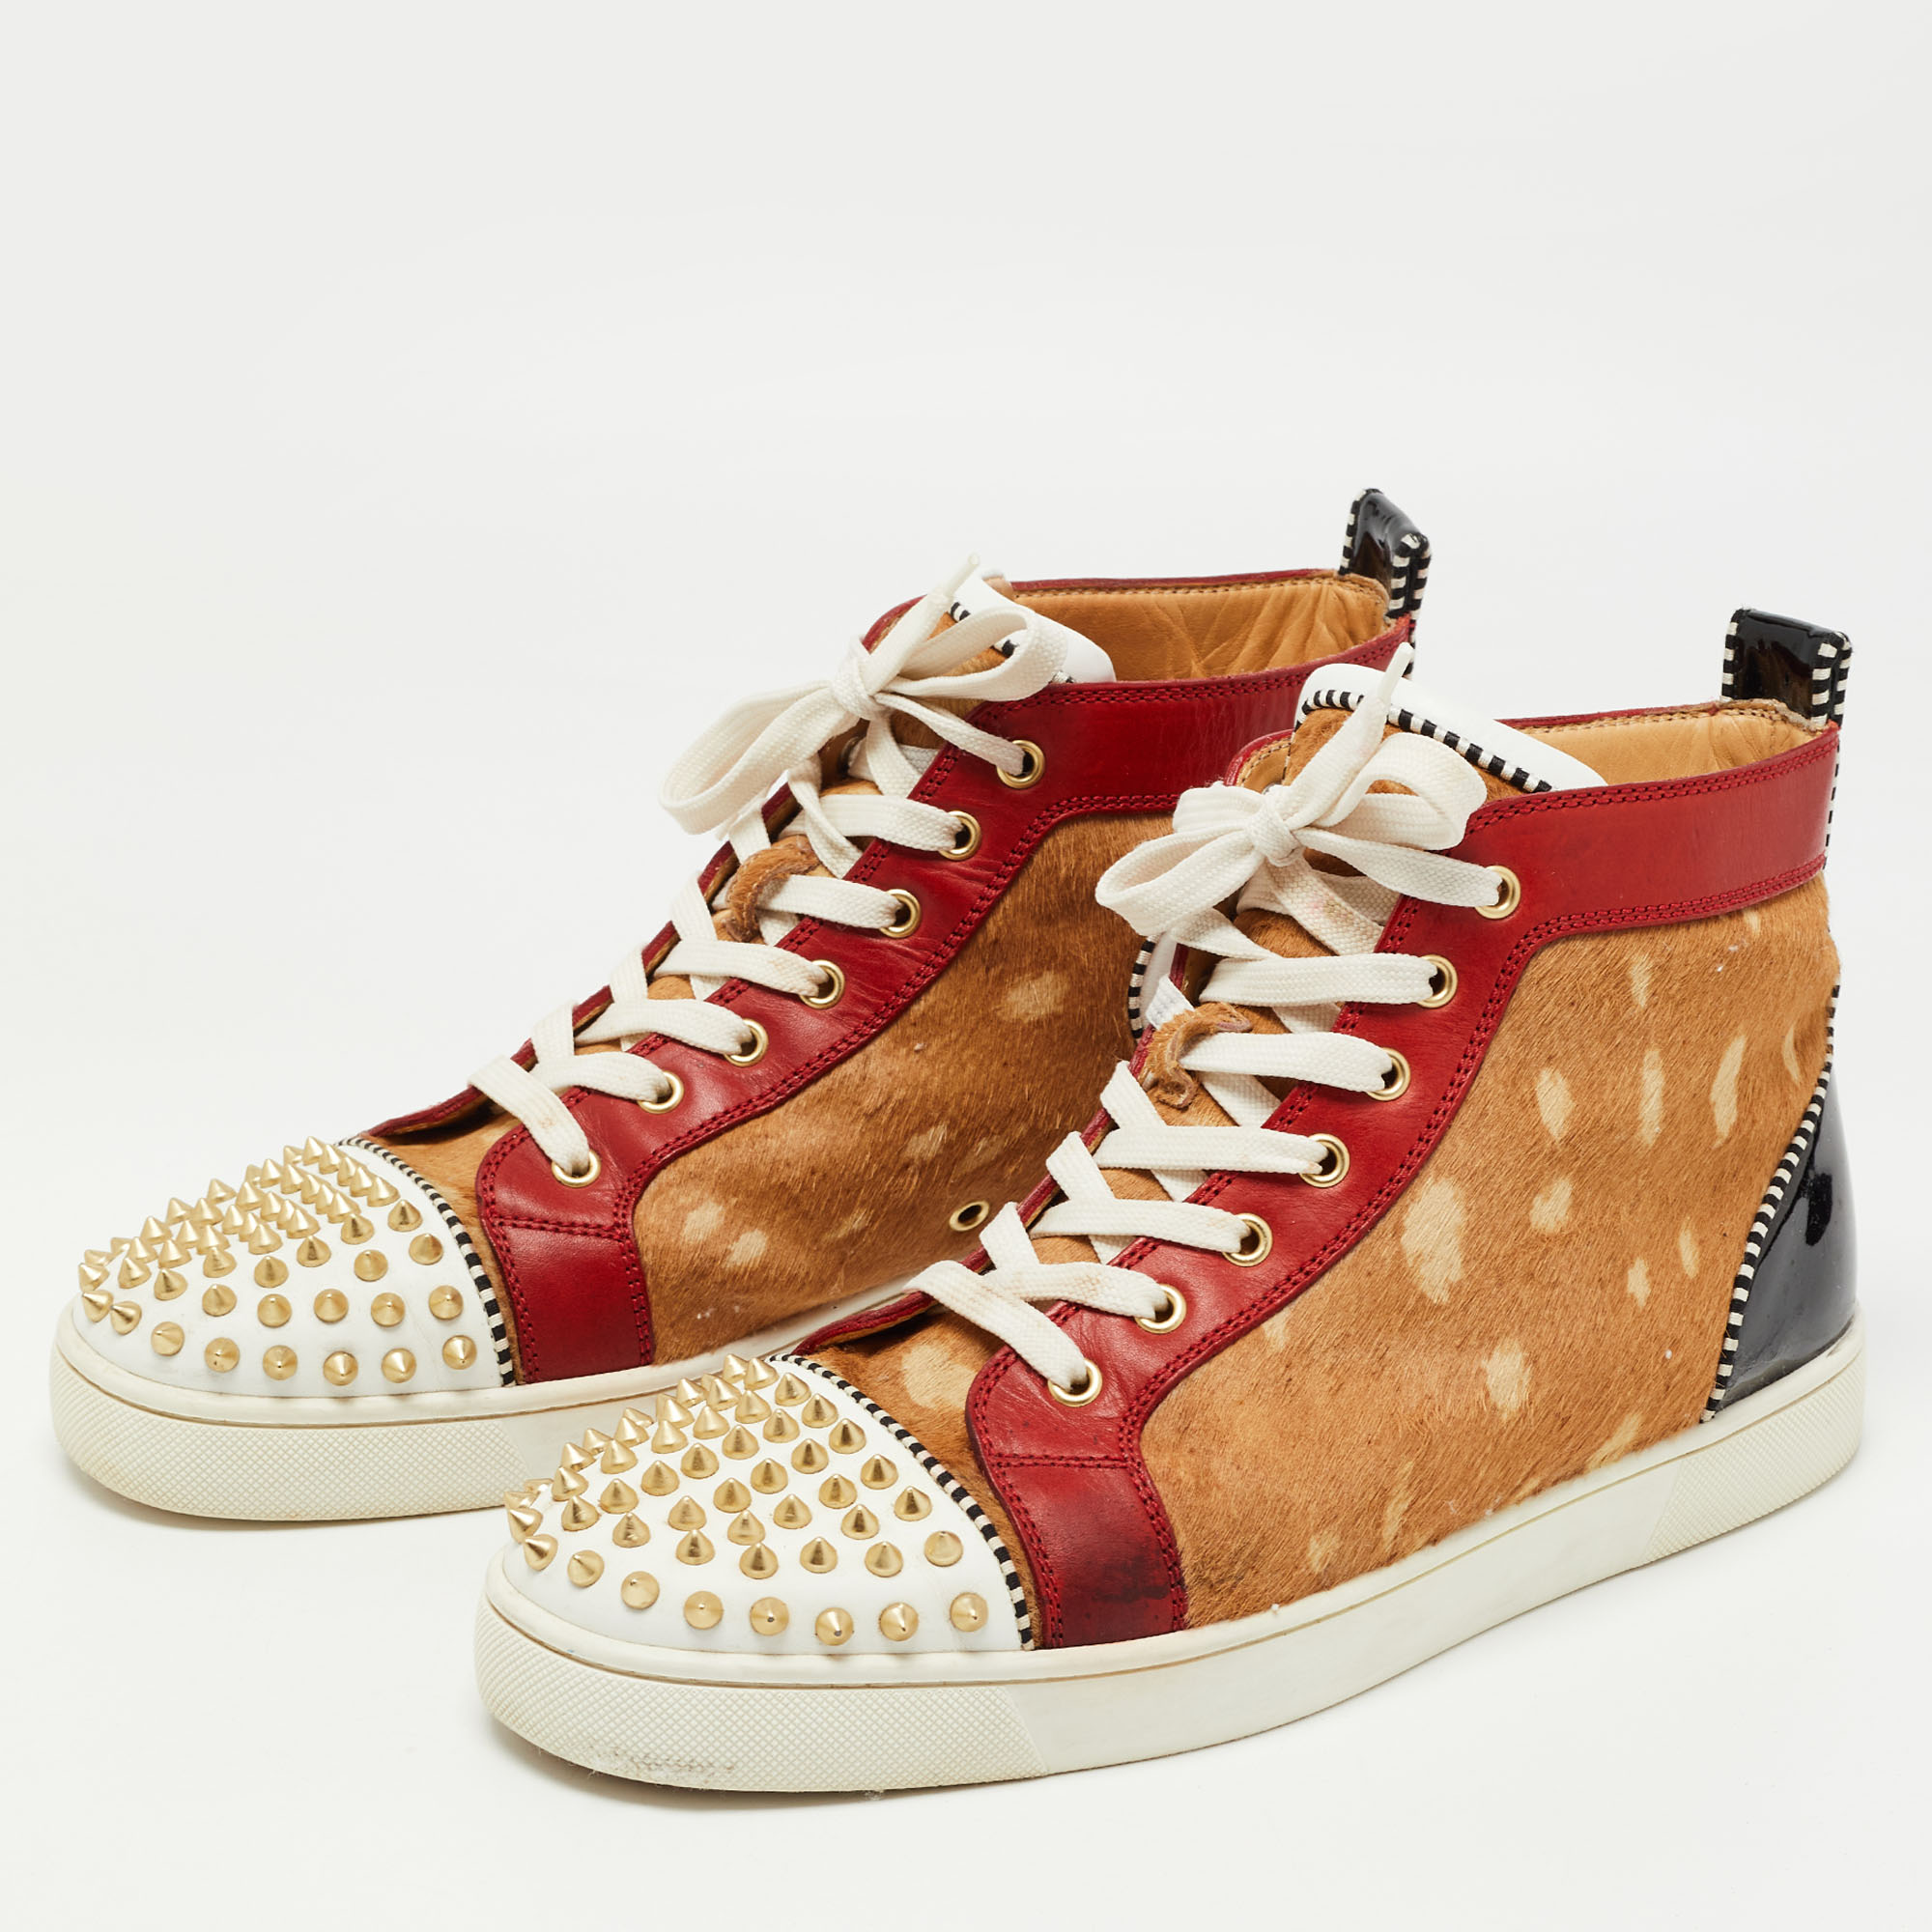 

Christian Louboutin Multicolor Calf hair And Patent Leather Louis Spikes High Top Sneakers Size